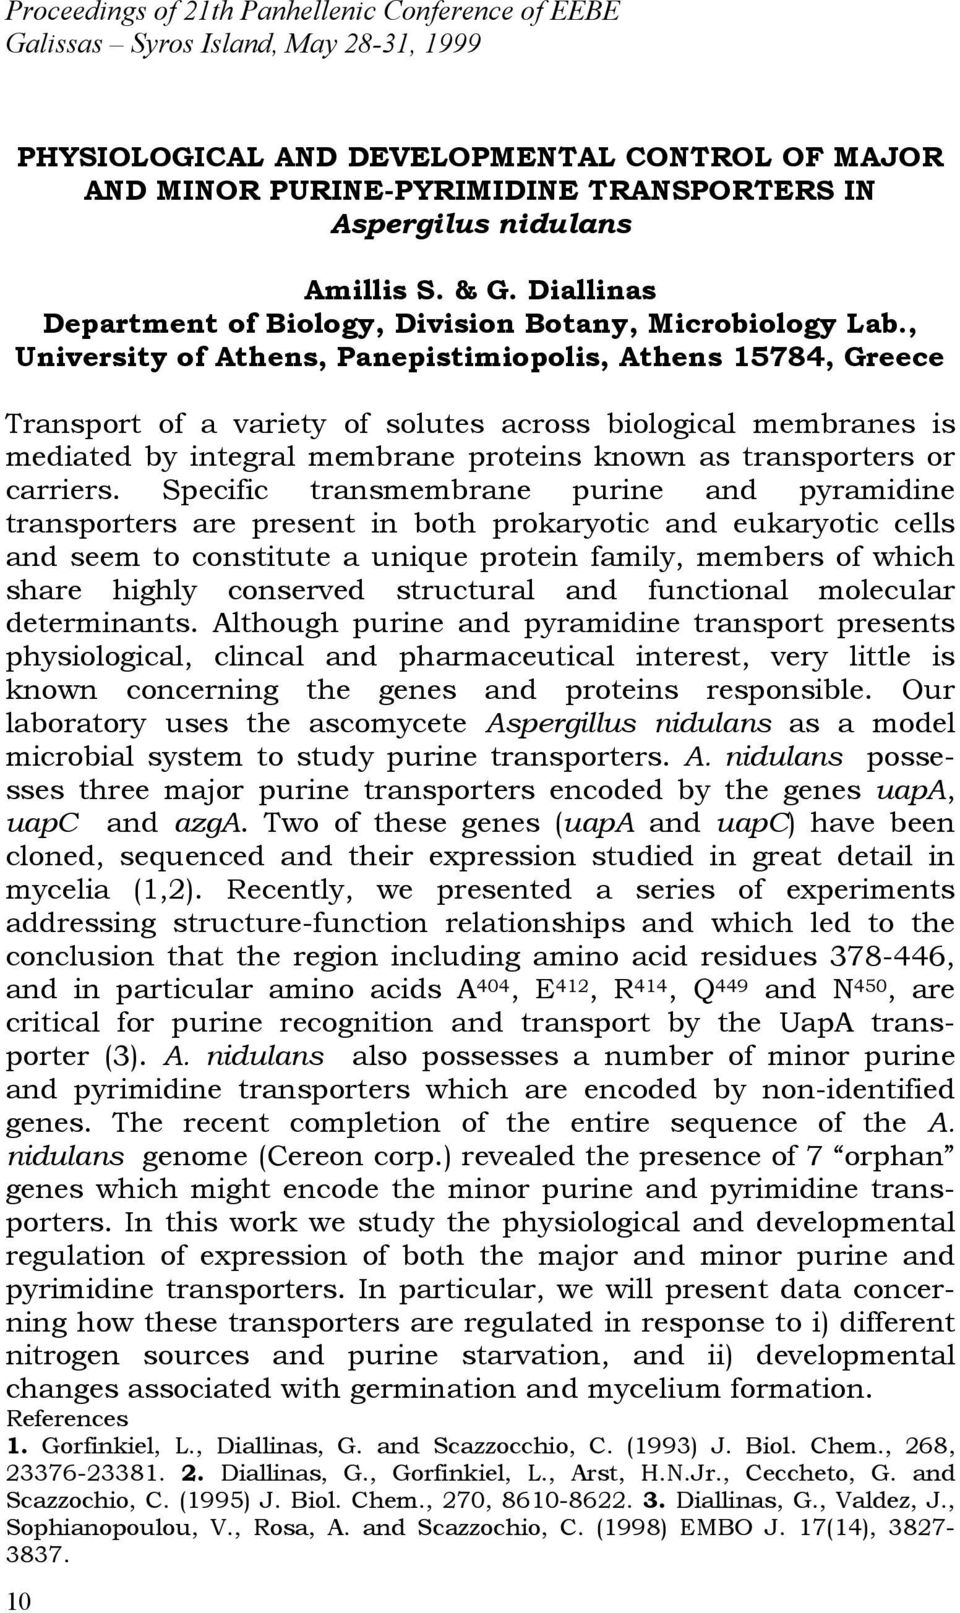 , University of Athens, Panepistimiopolis, Athens 15784, Greece Transport of a variety of solutes across biological membranes is mediated by integral membrane proteins known as transporters or